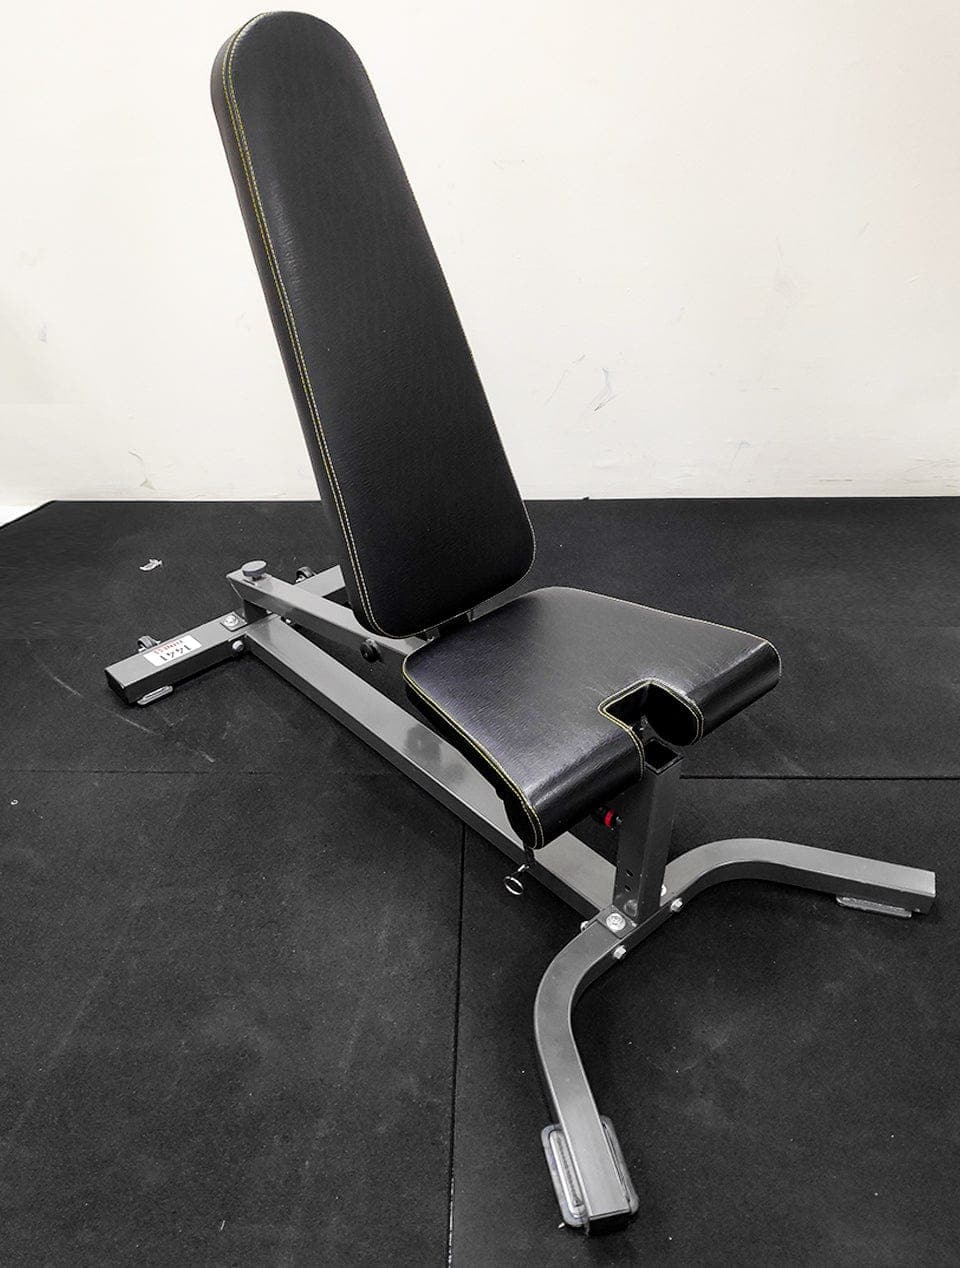 PRSAE 1441 Fitness Adjustable Commercial Bench with Preacher Curl Extension - X3-0112A